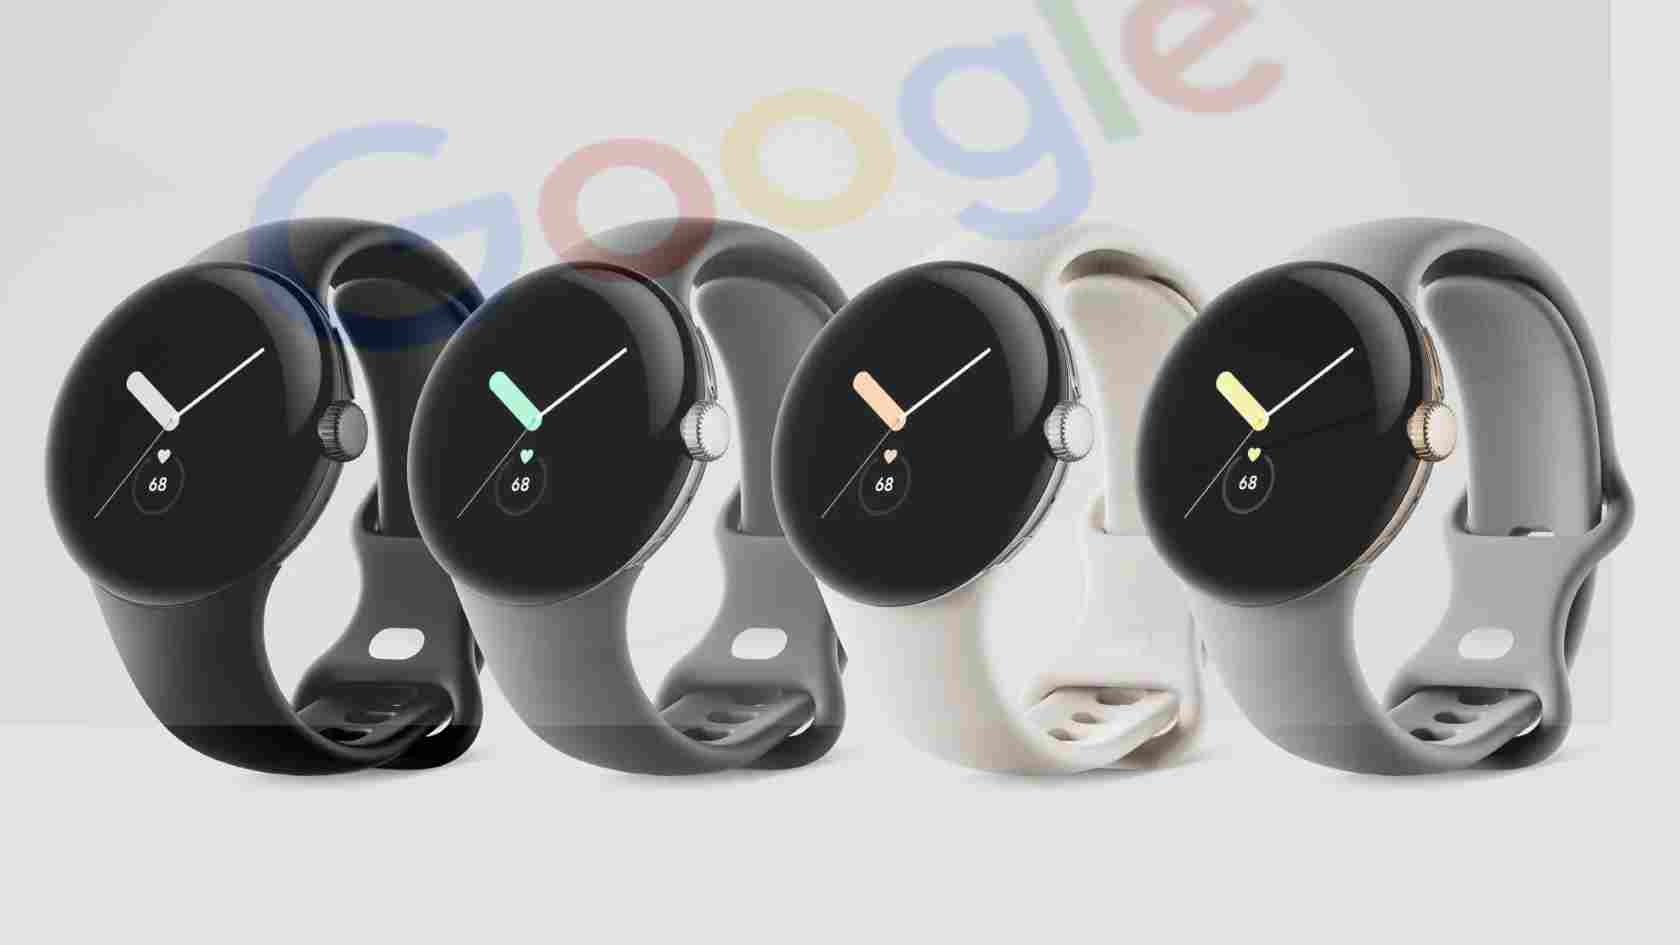 Google Pixel Watch 2 Colors and Designs Revealed: A Leaked Concept Design